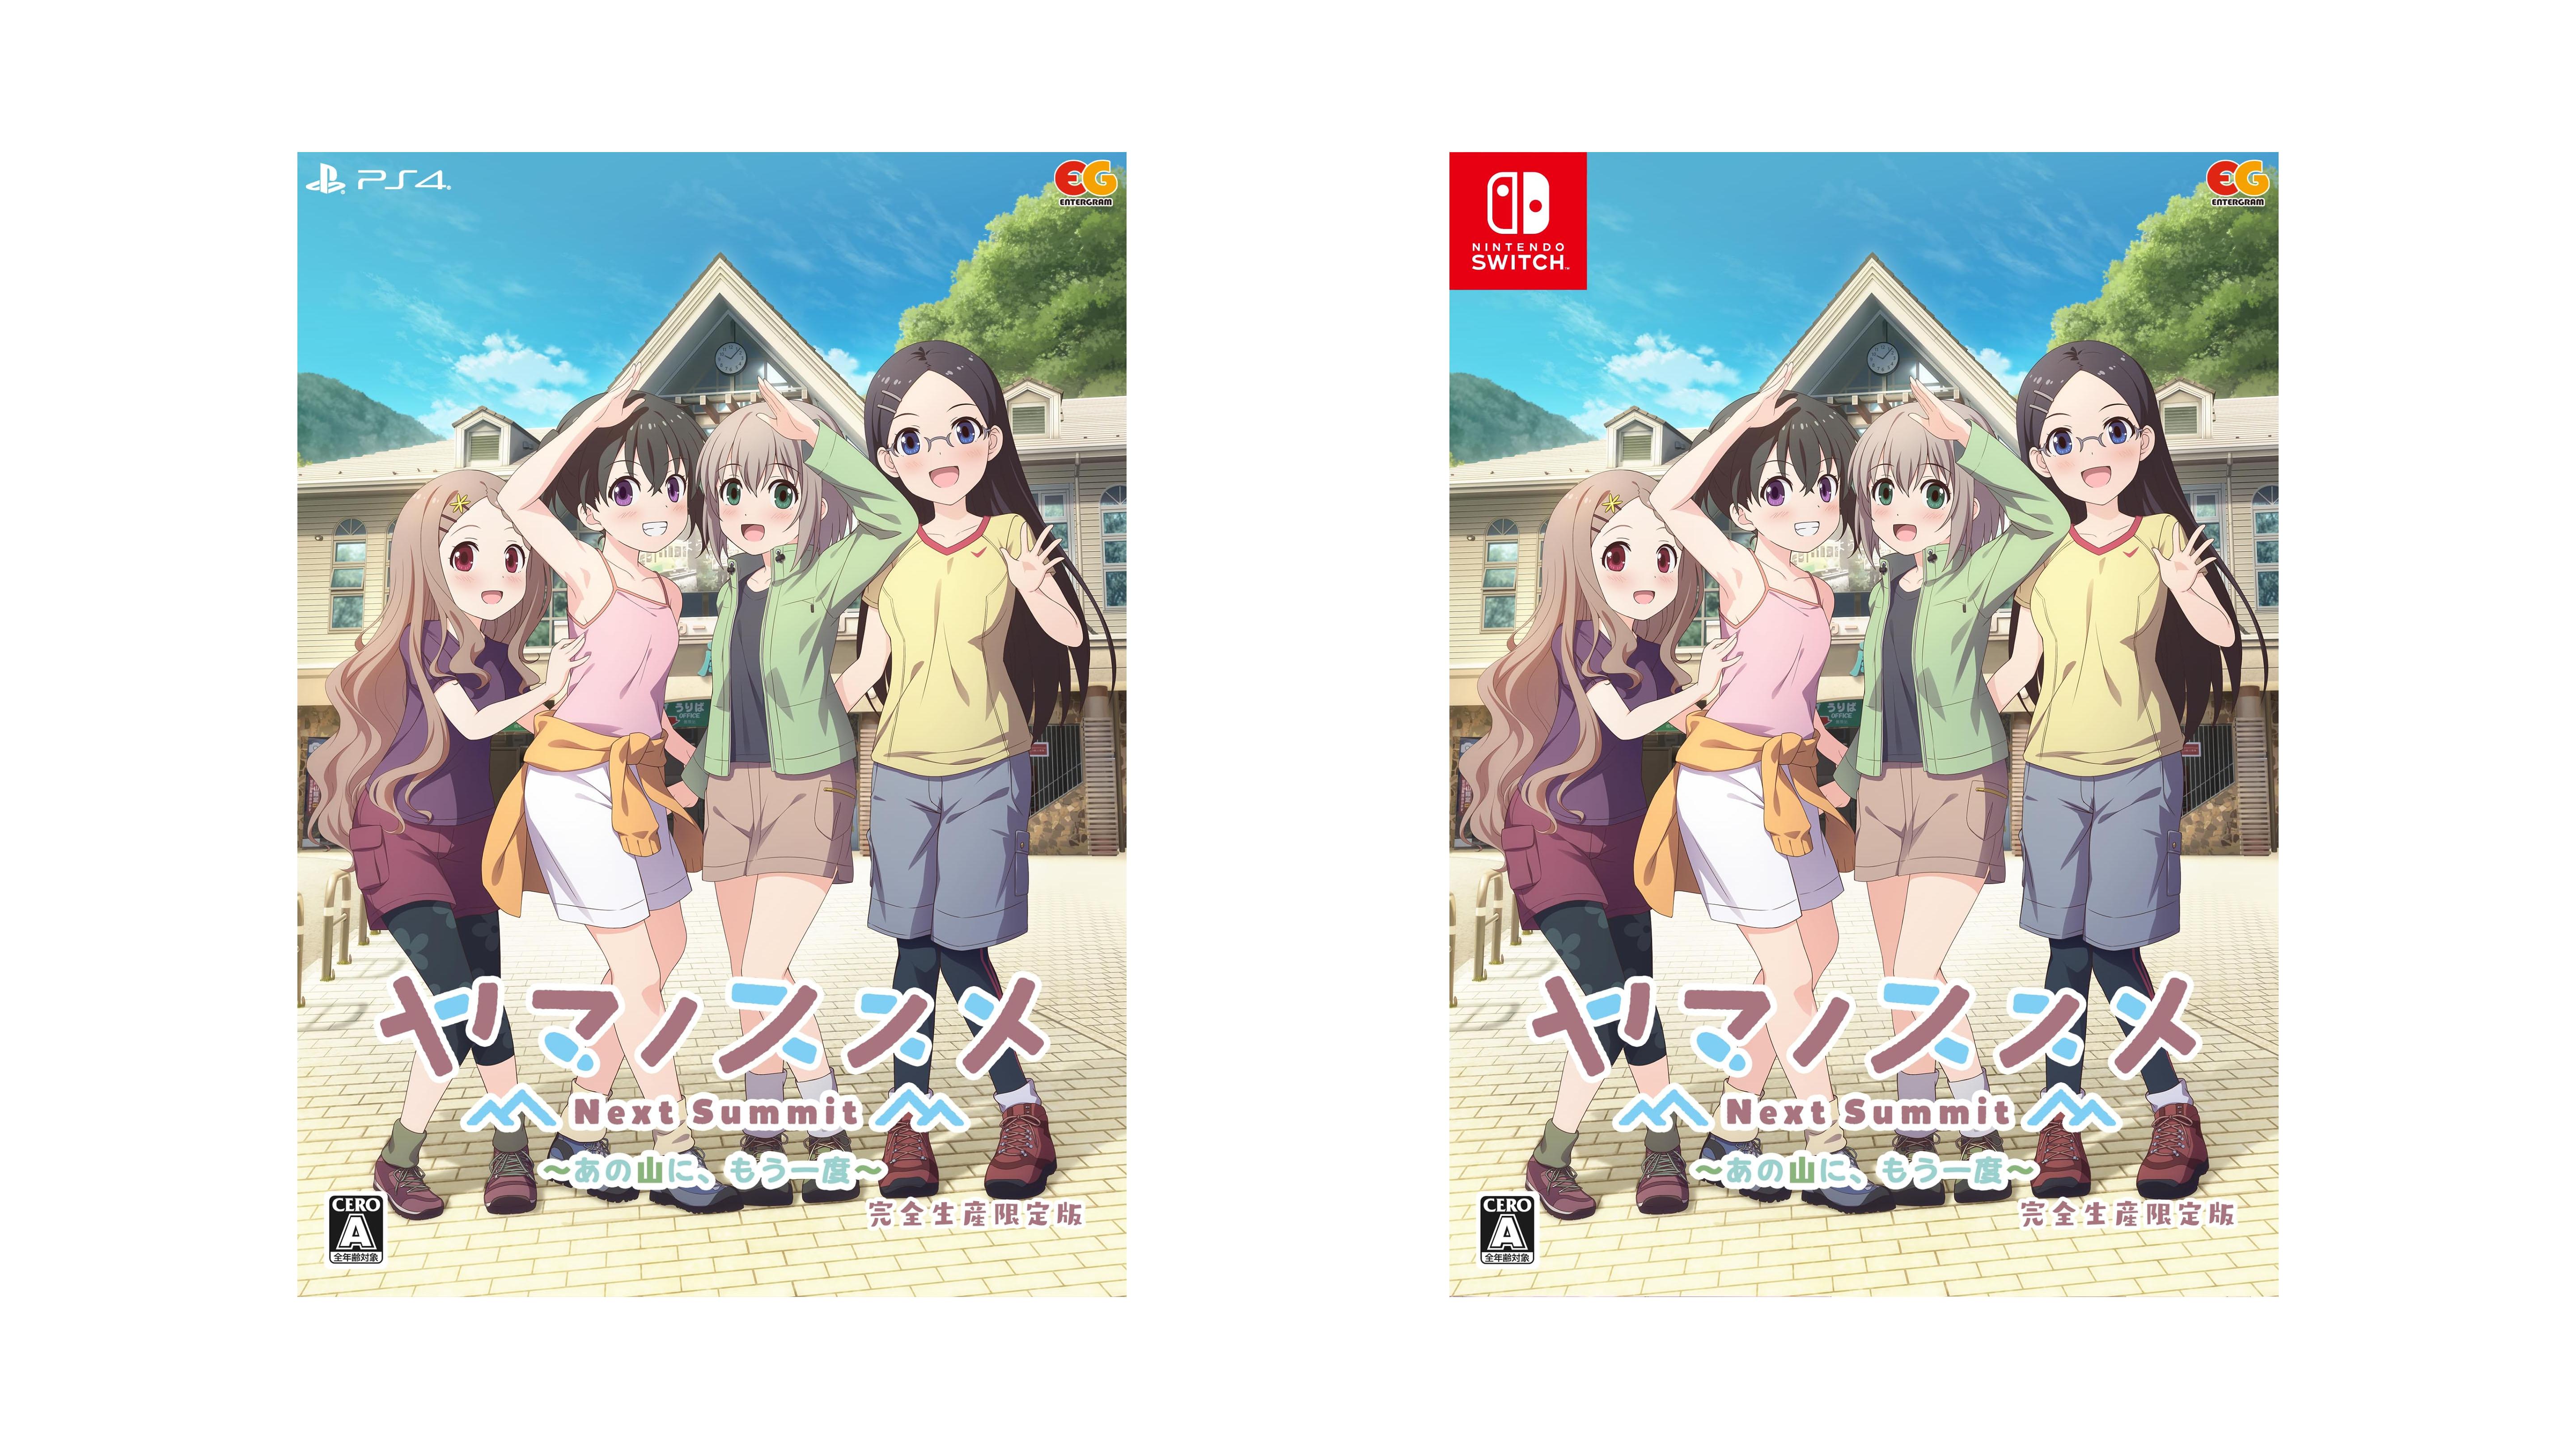 Encouragement of Climb: Next Summit Anime Gets a Game